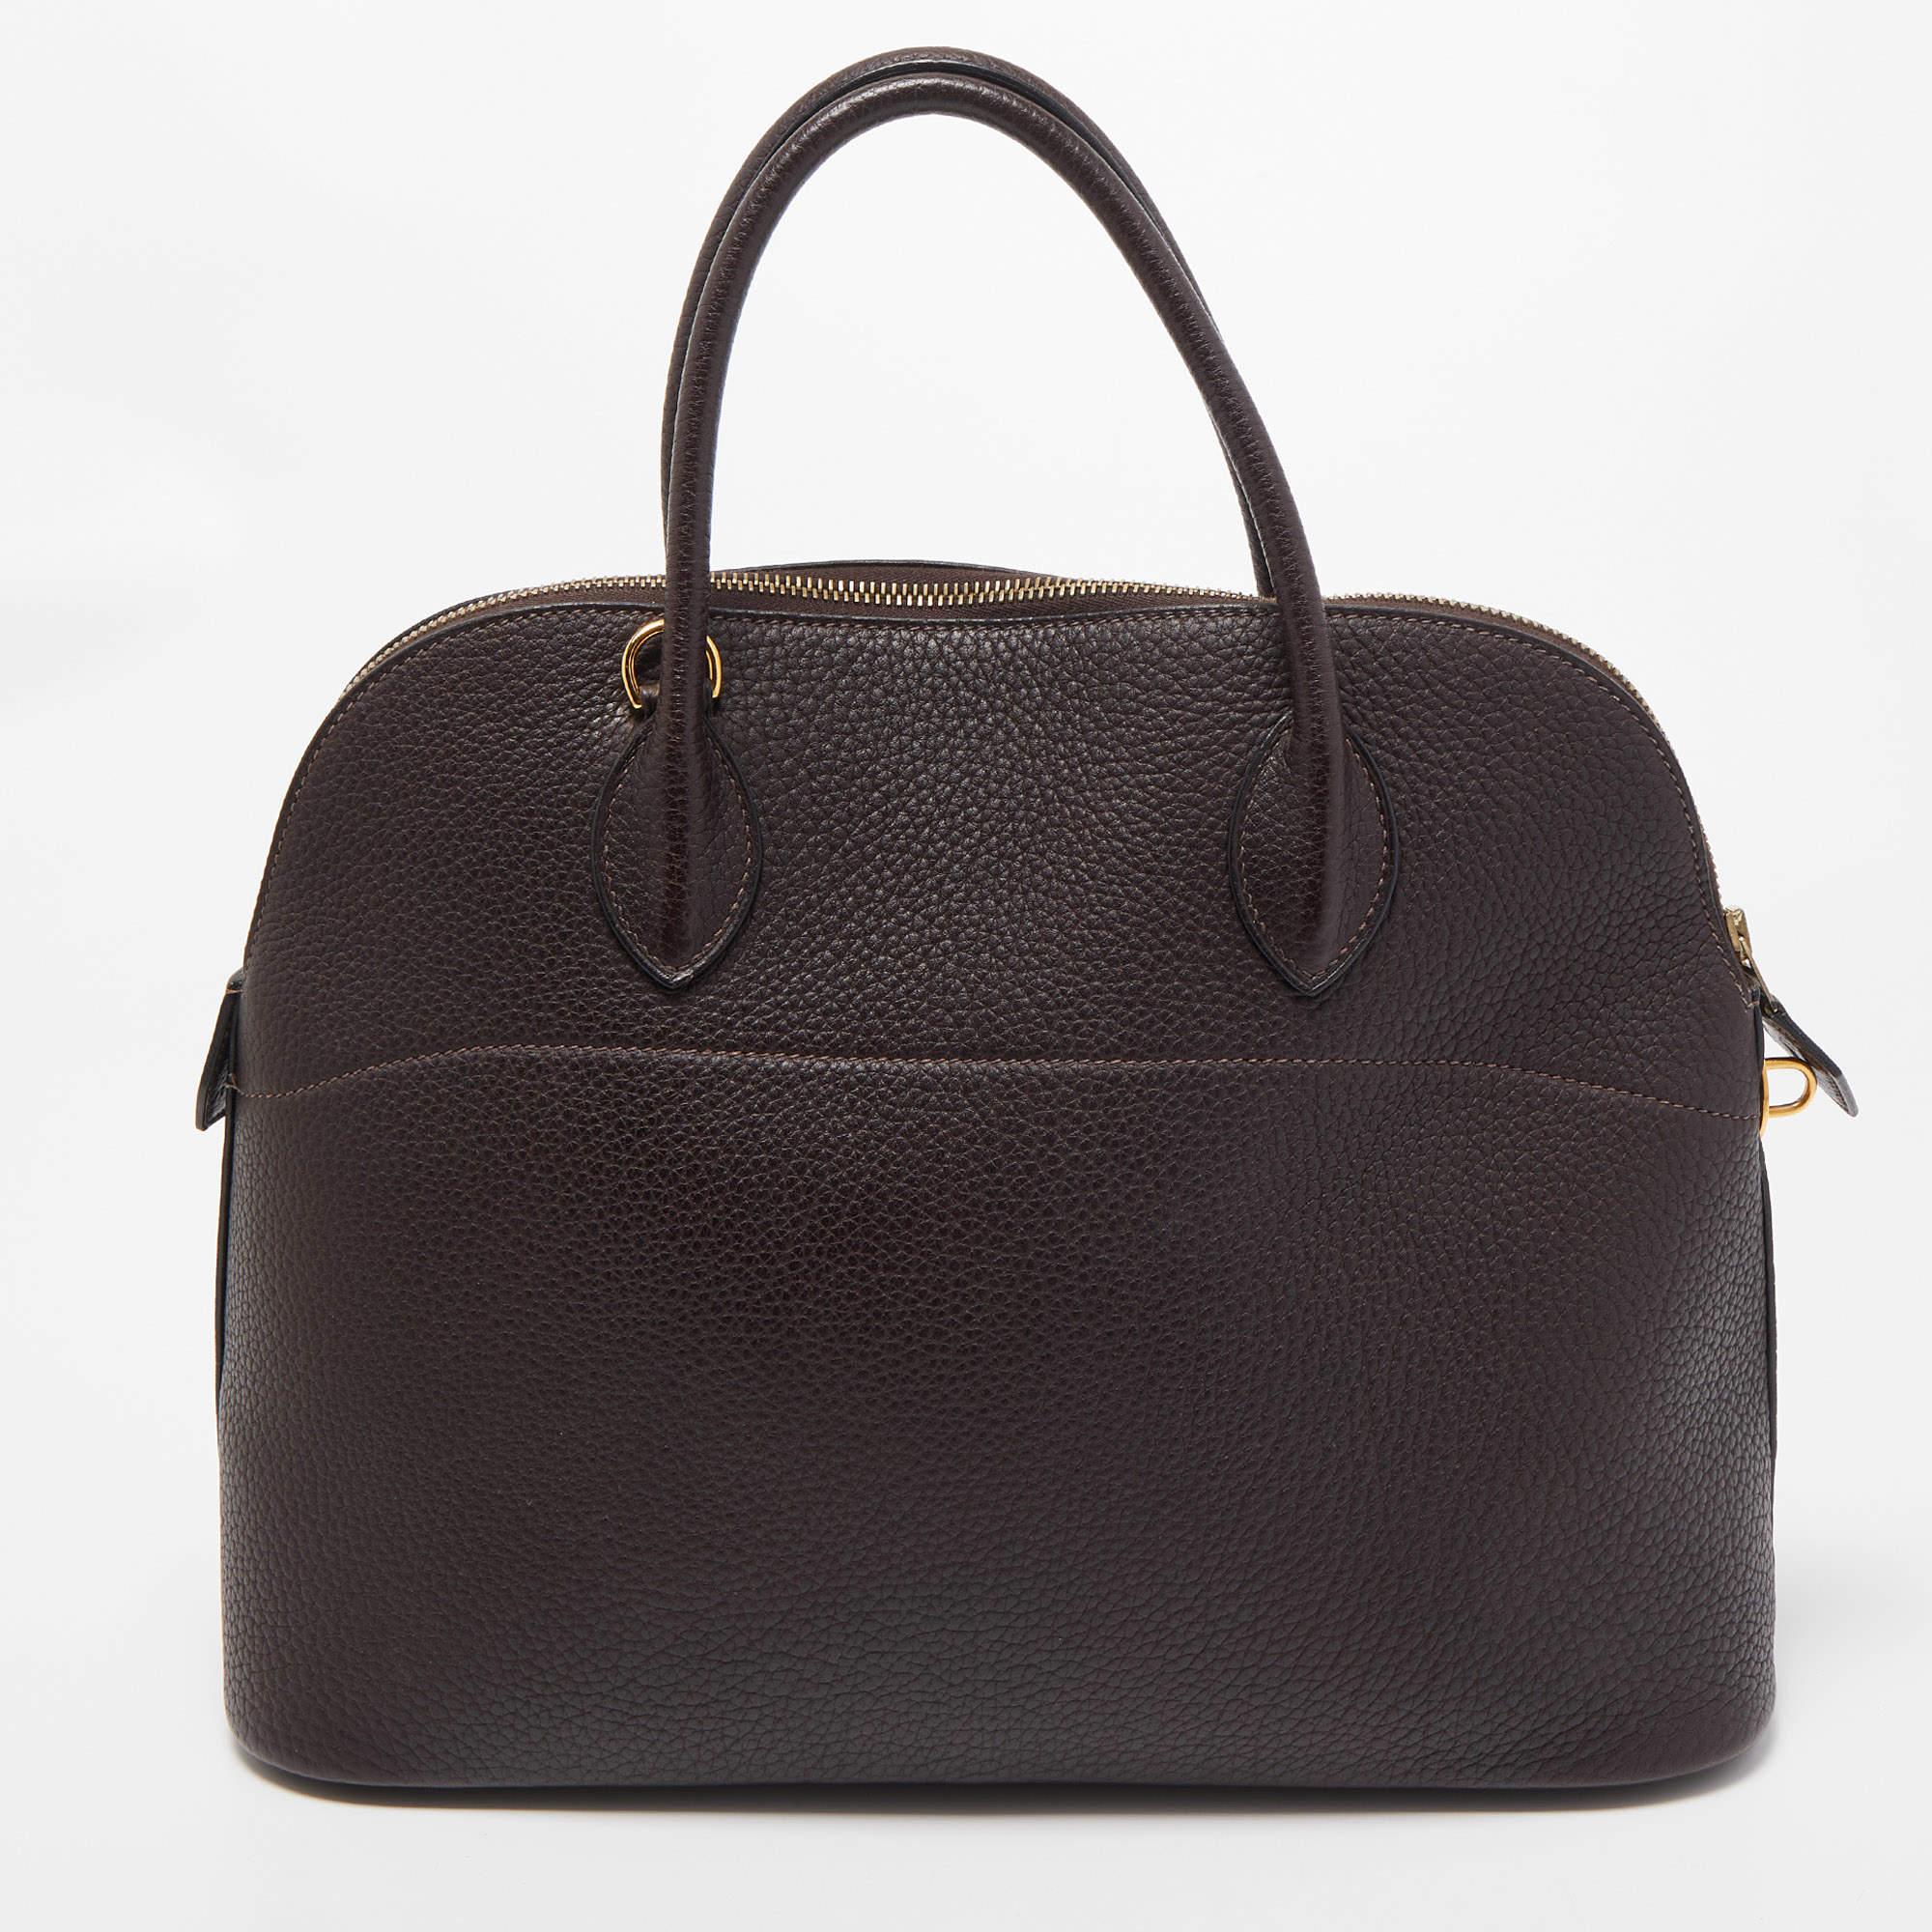 Luxuriously crafted by the experts at Hermes, this stunning Bolide 35 bag is a must-have accessory for fashion lovers. An apt everyday wear bag, it is the perfect combination of sophistication and practicality. Crafted from Togo leather, this bag